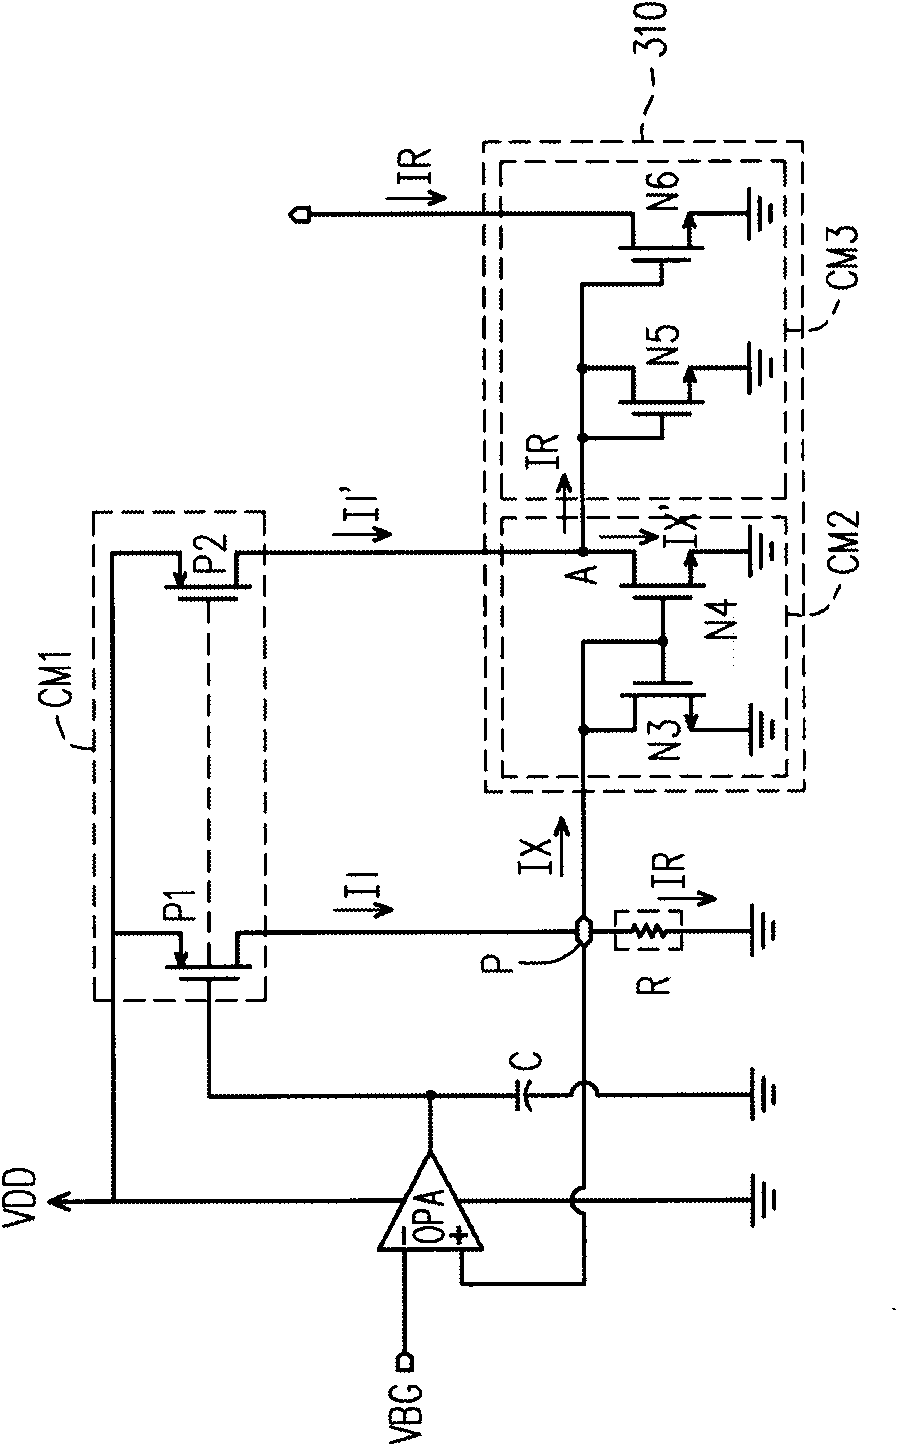 Reference current generating circuit applied to low operating voltage